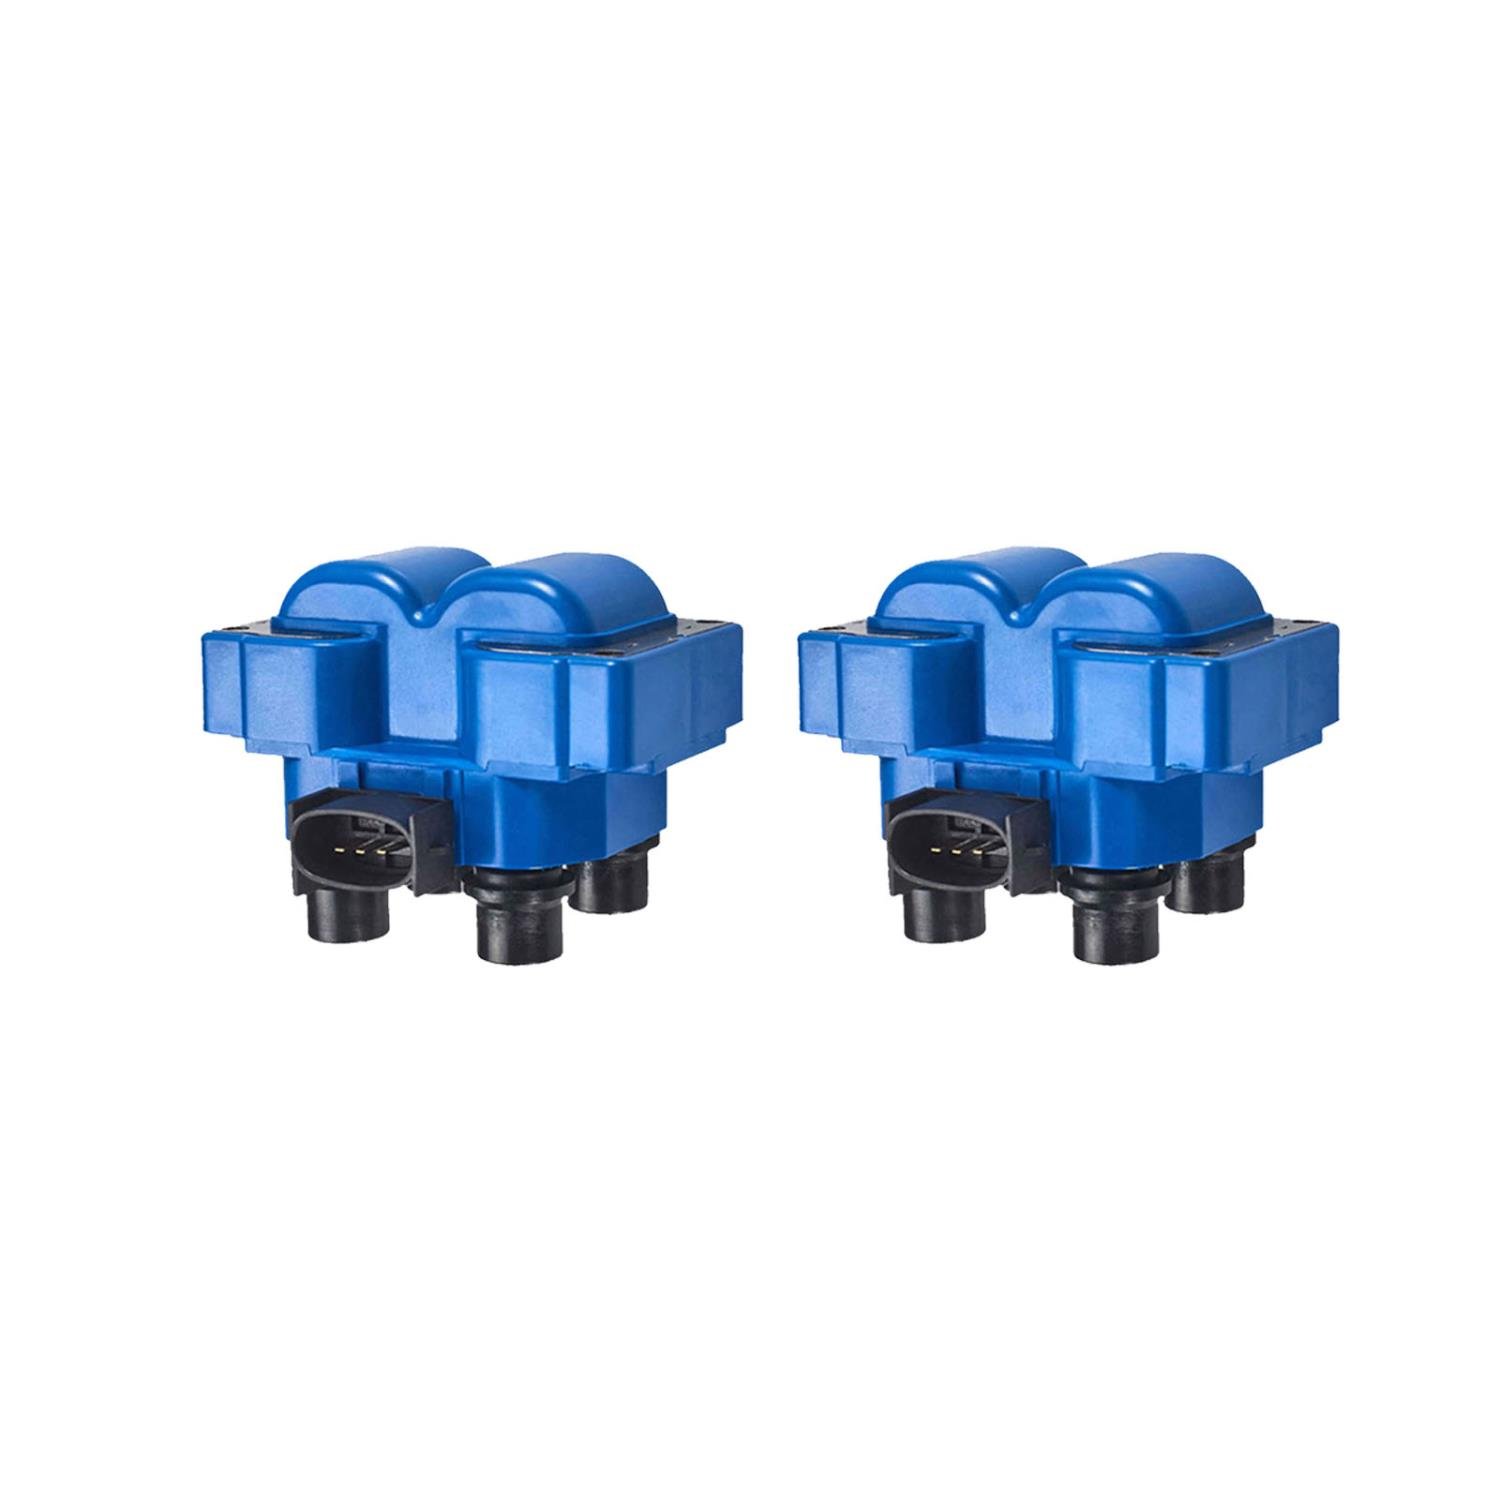 High-Performance Ignition Coils for Ford F-150/F-250, Lincoln Mercury [Blue]